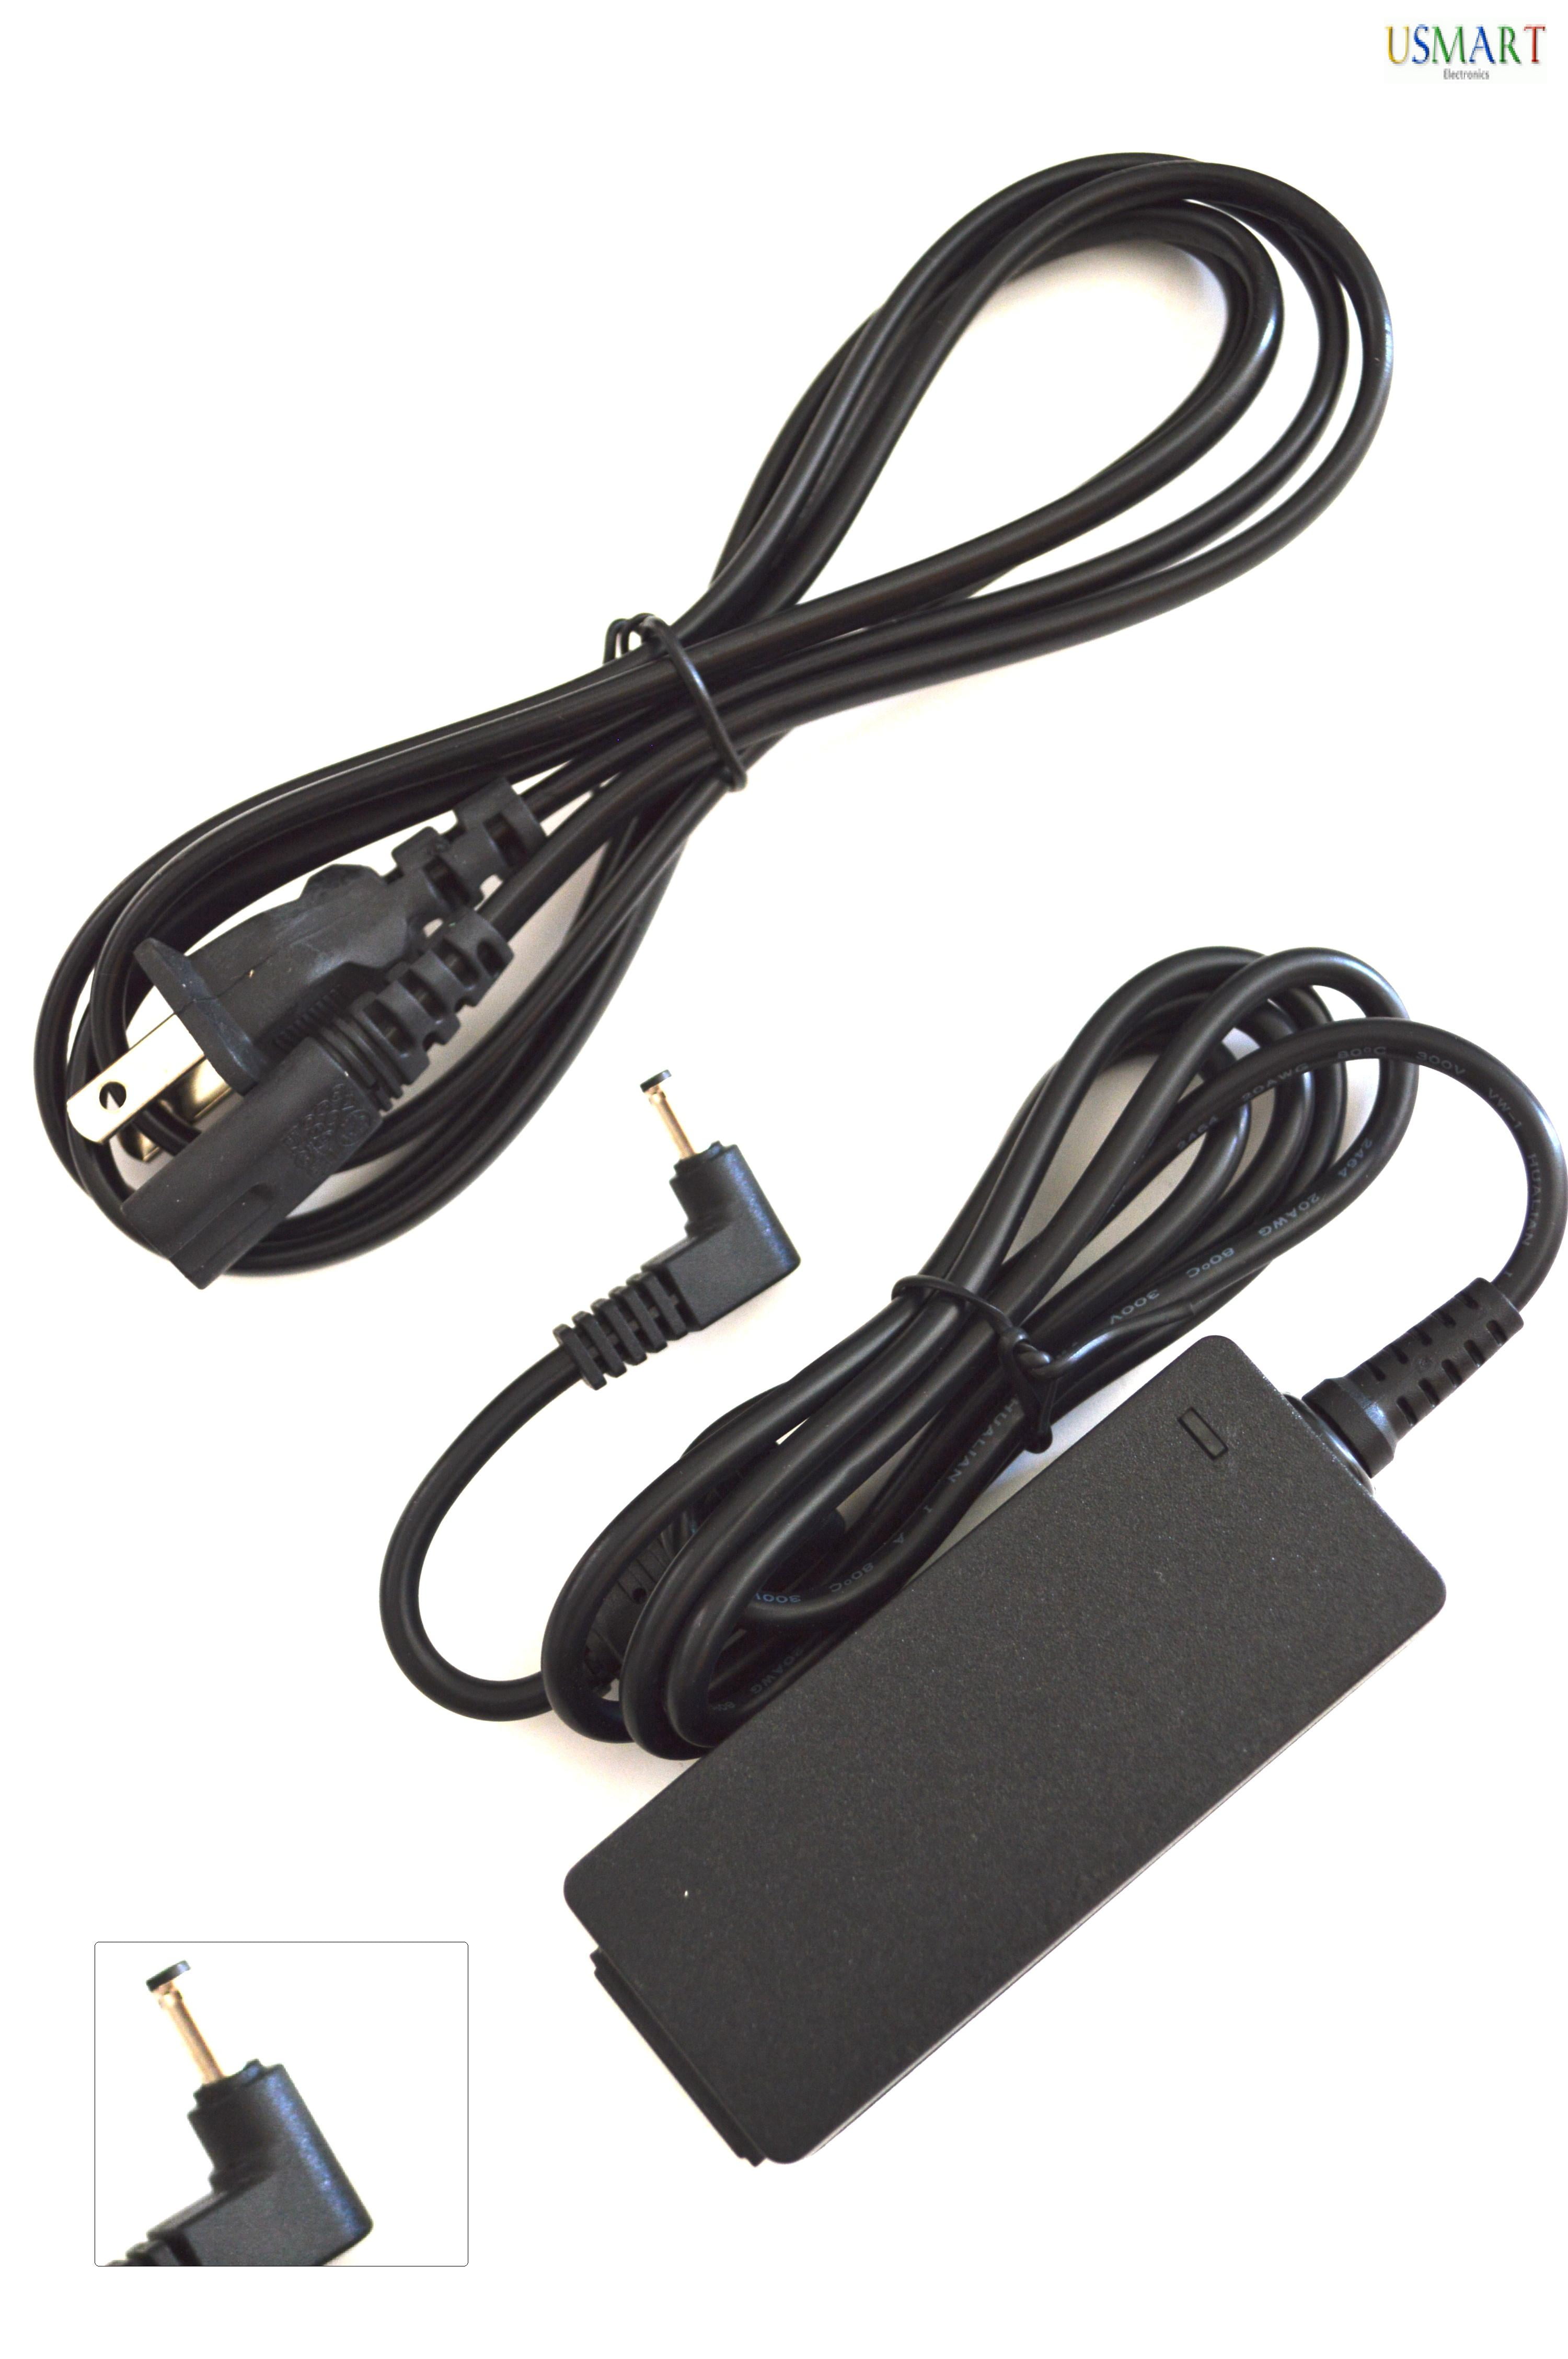 Charger for Lenovo Ideapad 3 3-15 3-14 3-16 Laptop, (Safety Certified by  UL), 65W, 45W